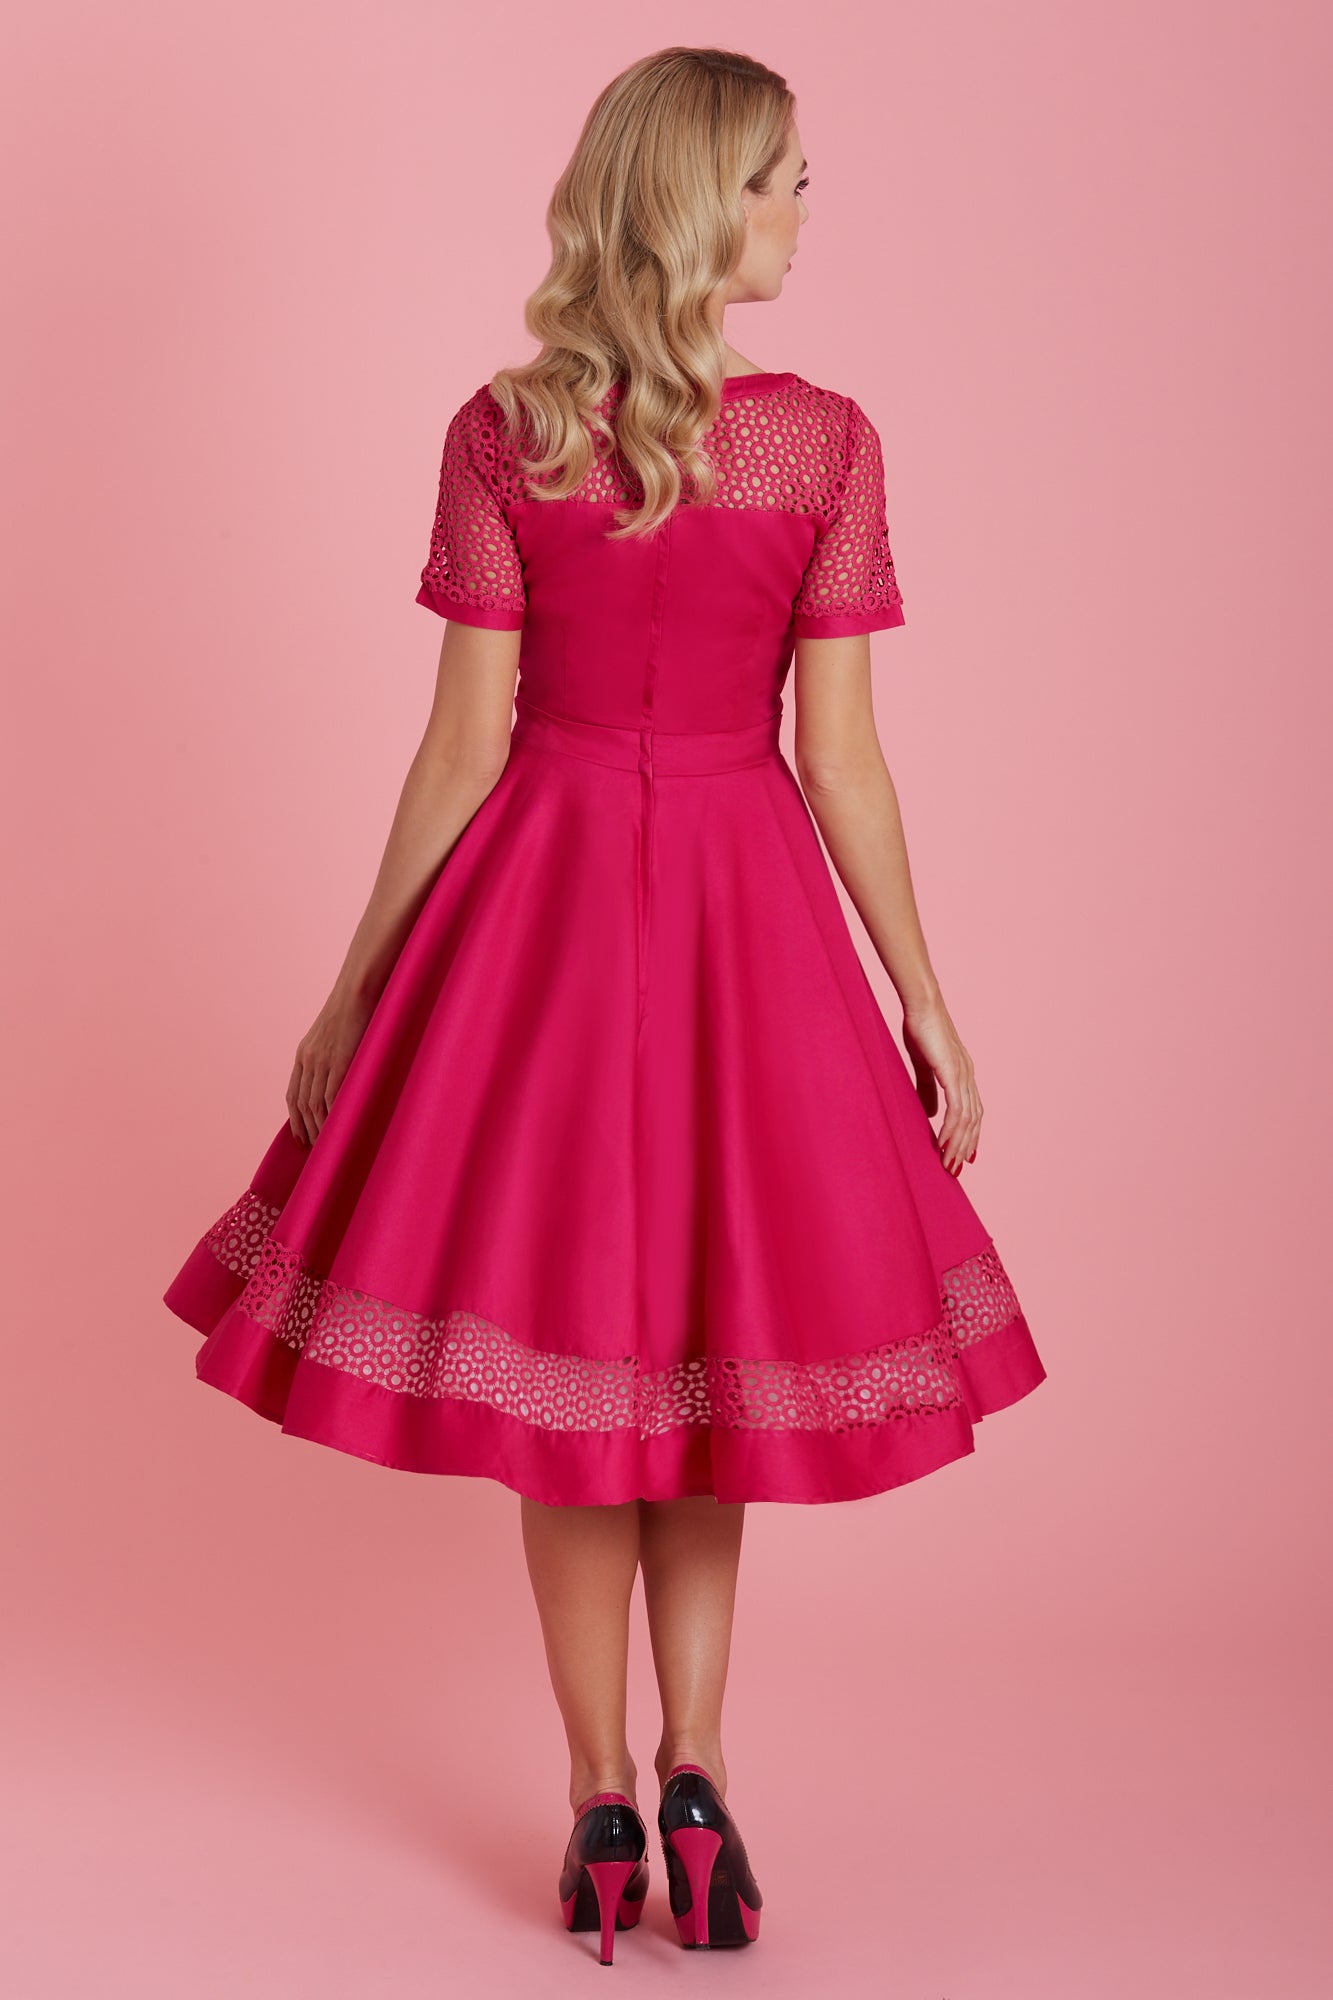 Woman's Lace Sleeved Dress in Hot Pink